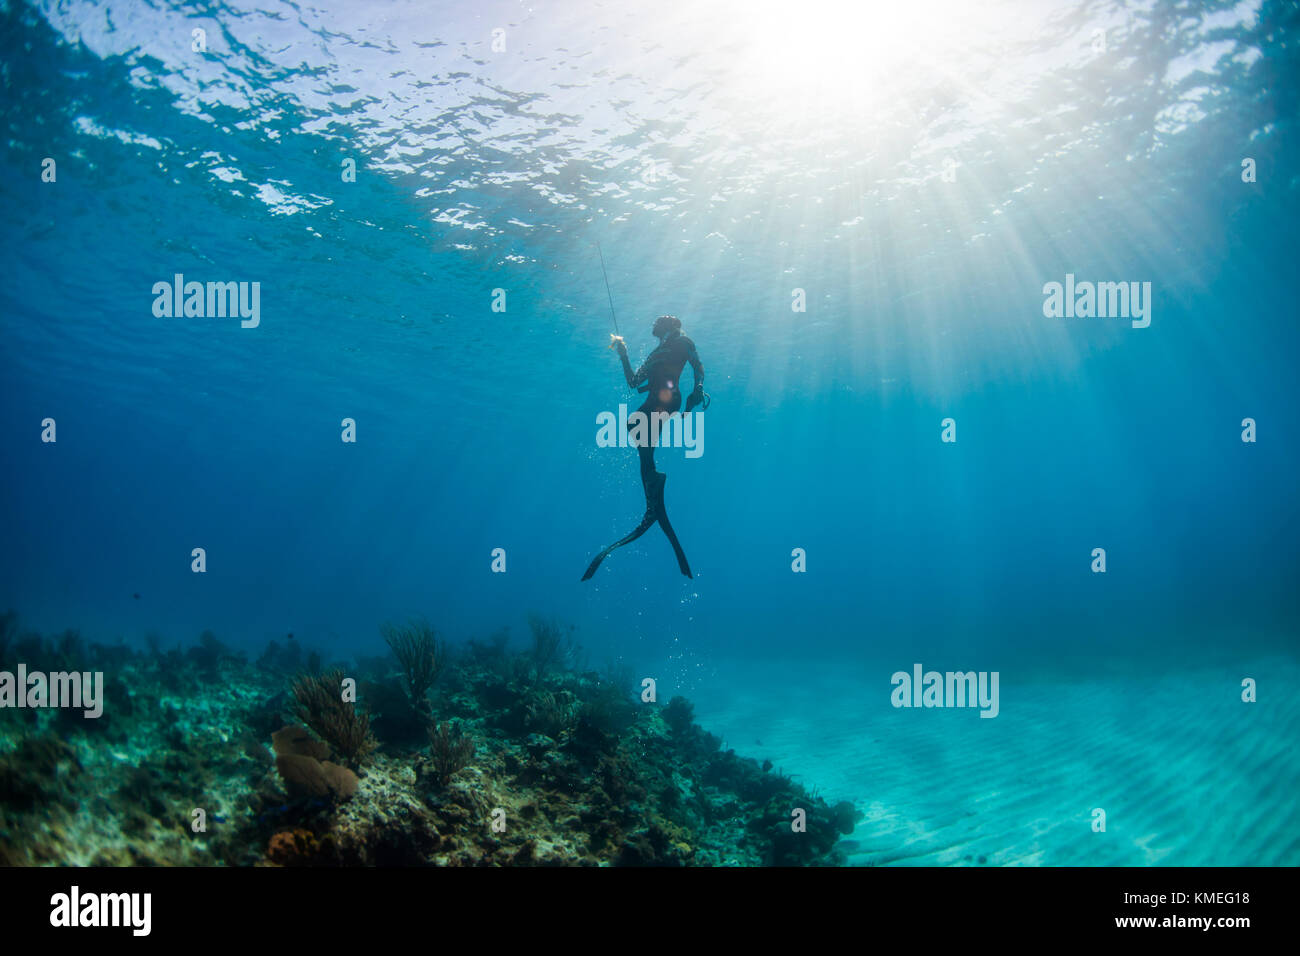 Diver surfacing after spearfishing underwater, Clarence Town, Long Island, Bahamas Stock Photo